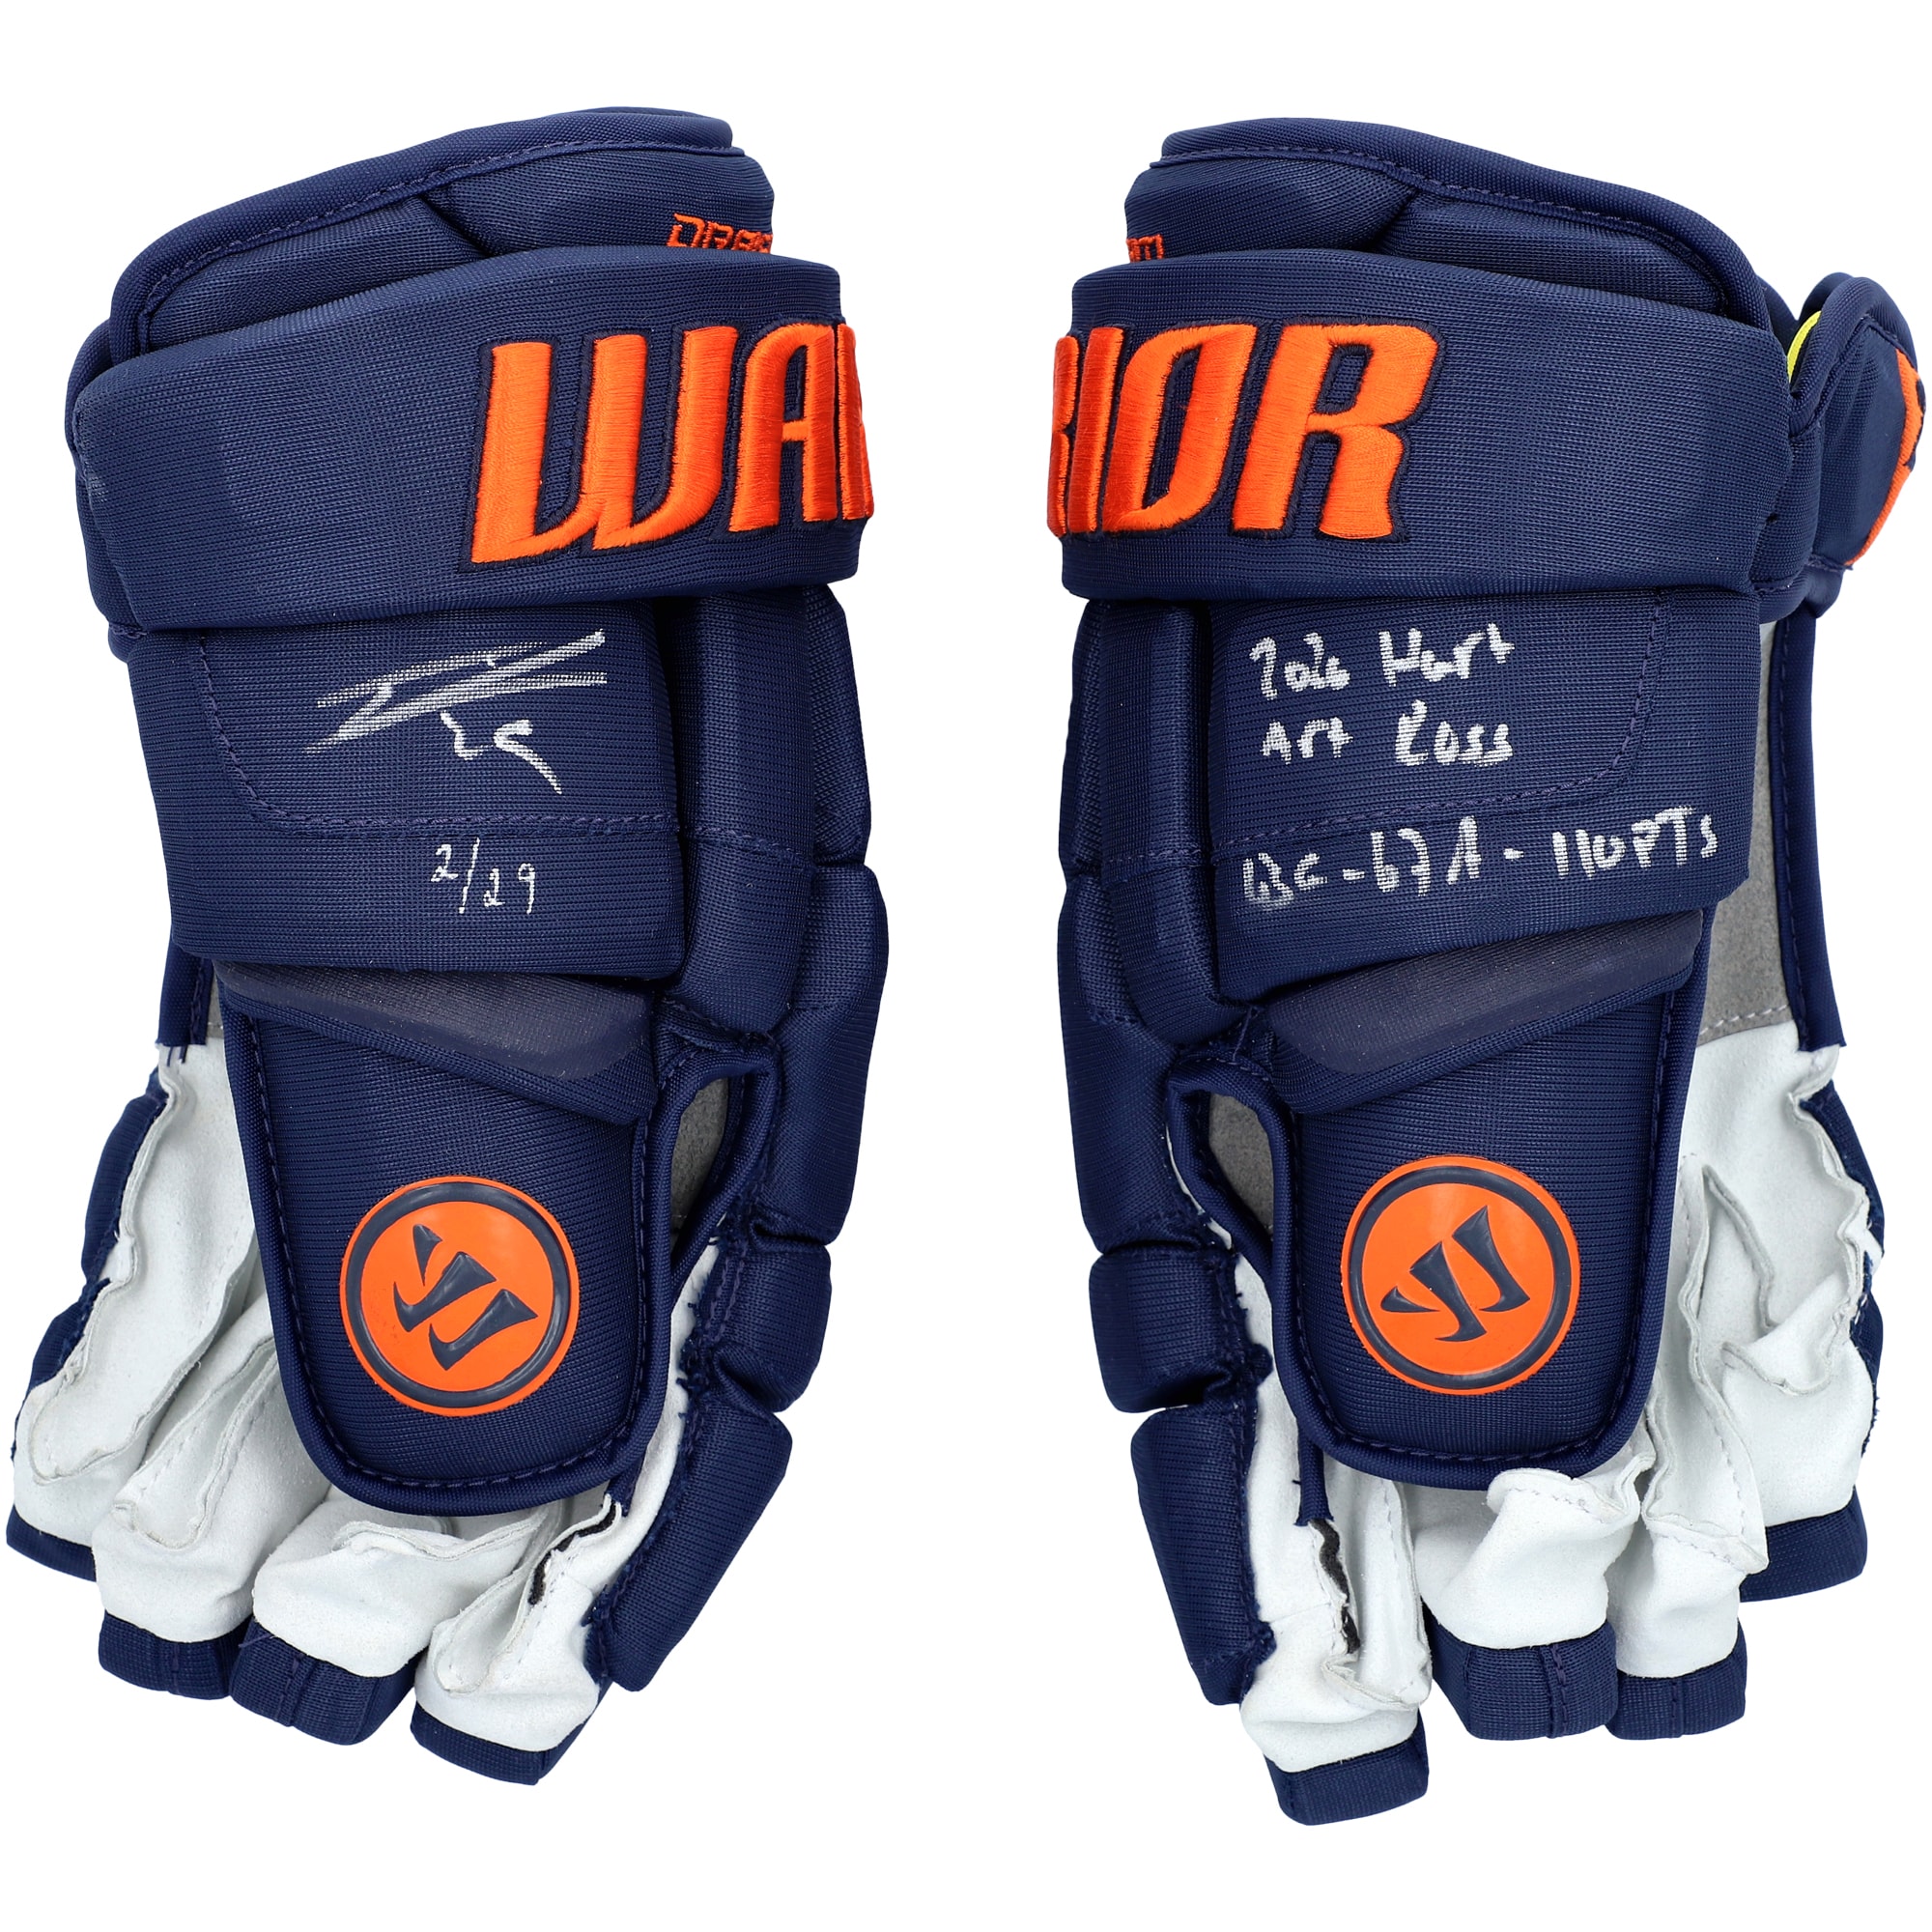 Leon Draisaitl Edmonton Oilers Autographed Warrior Navy Game Model Gloves with Multiple Inscriptions - Limited Edition of 29